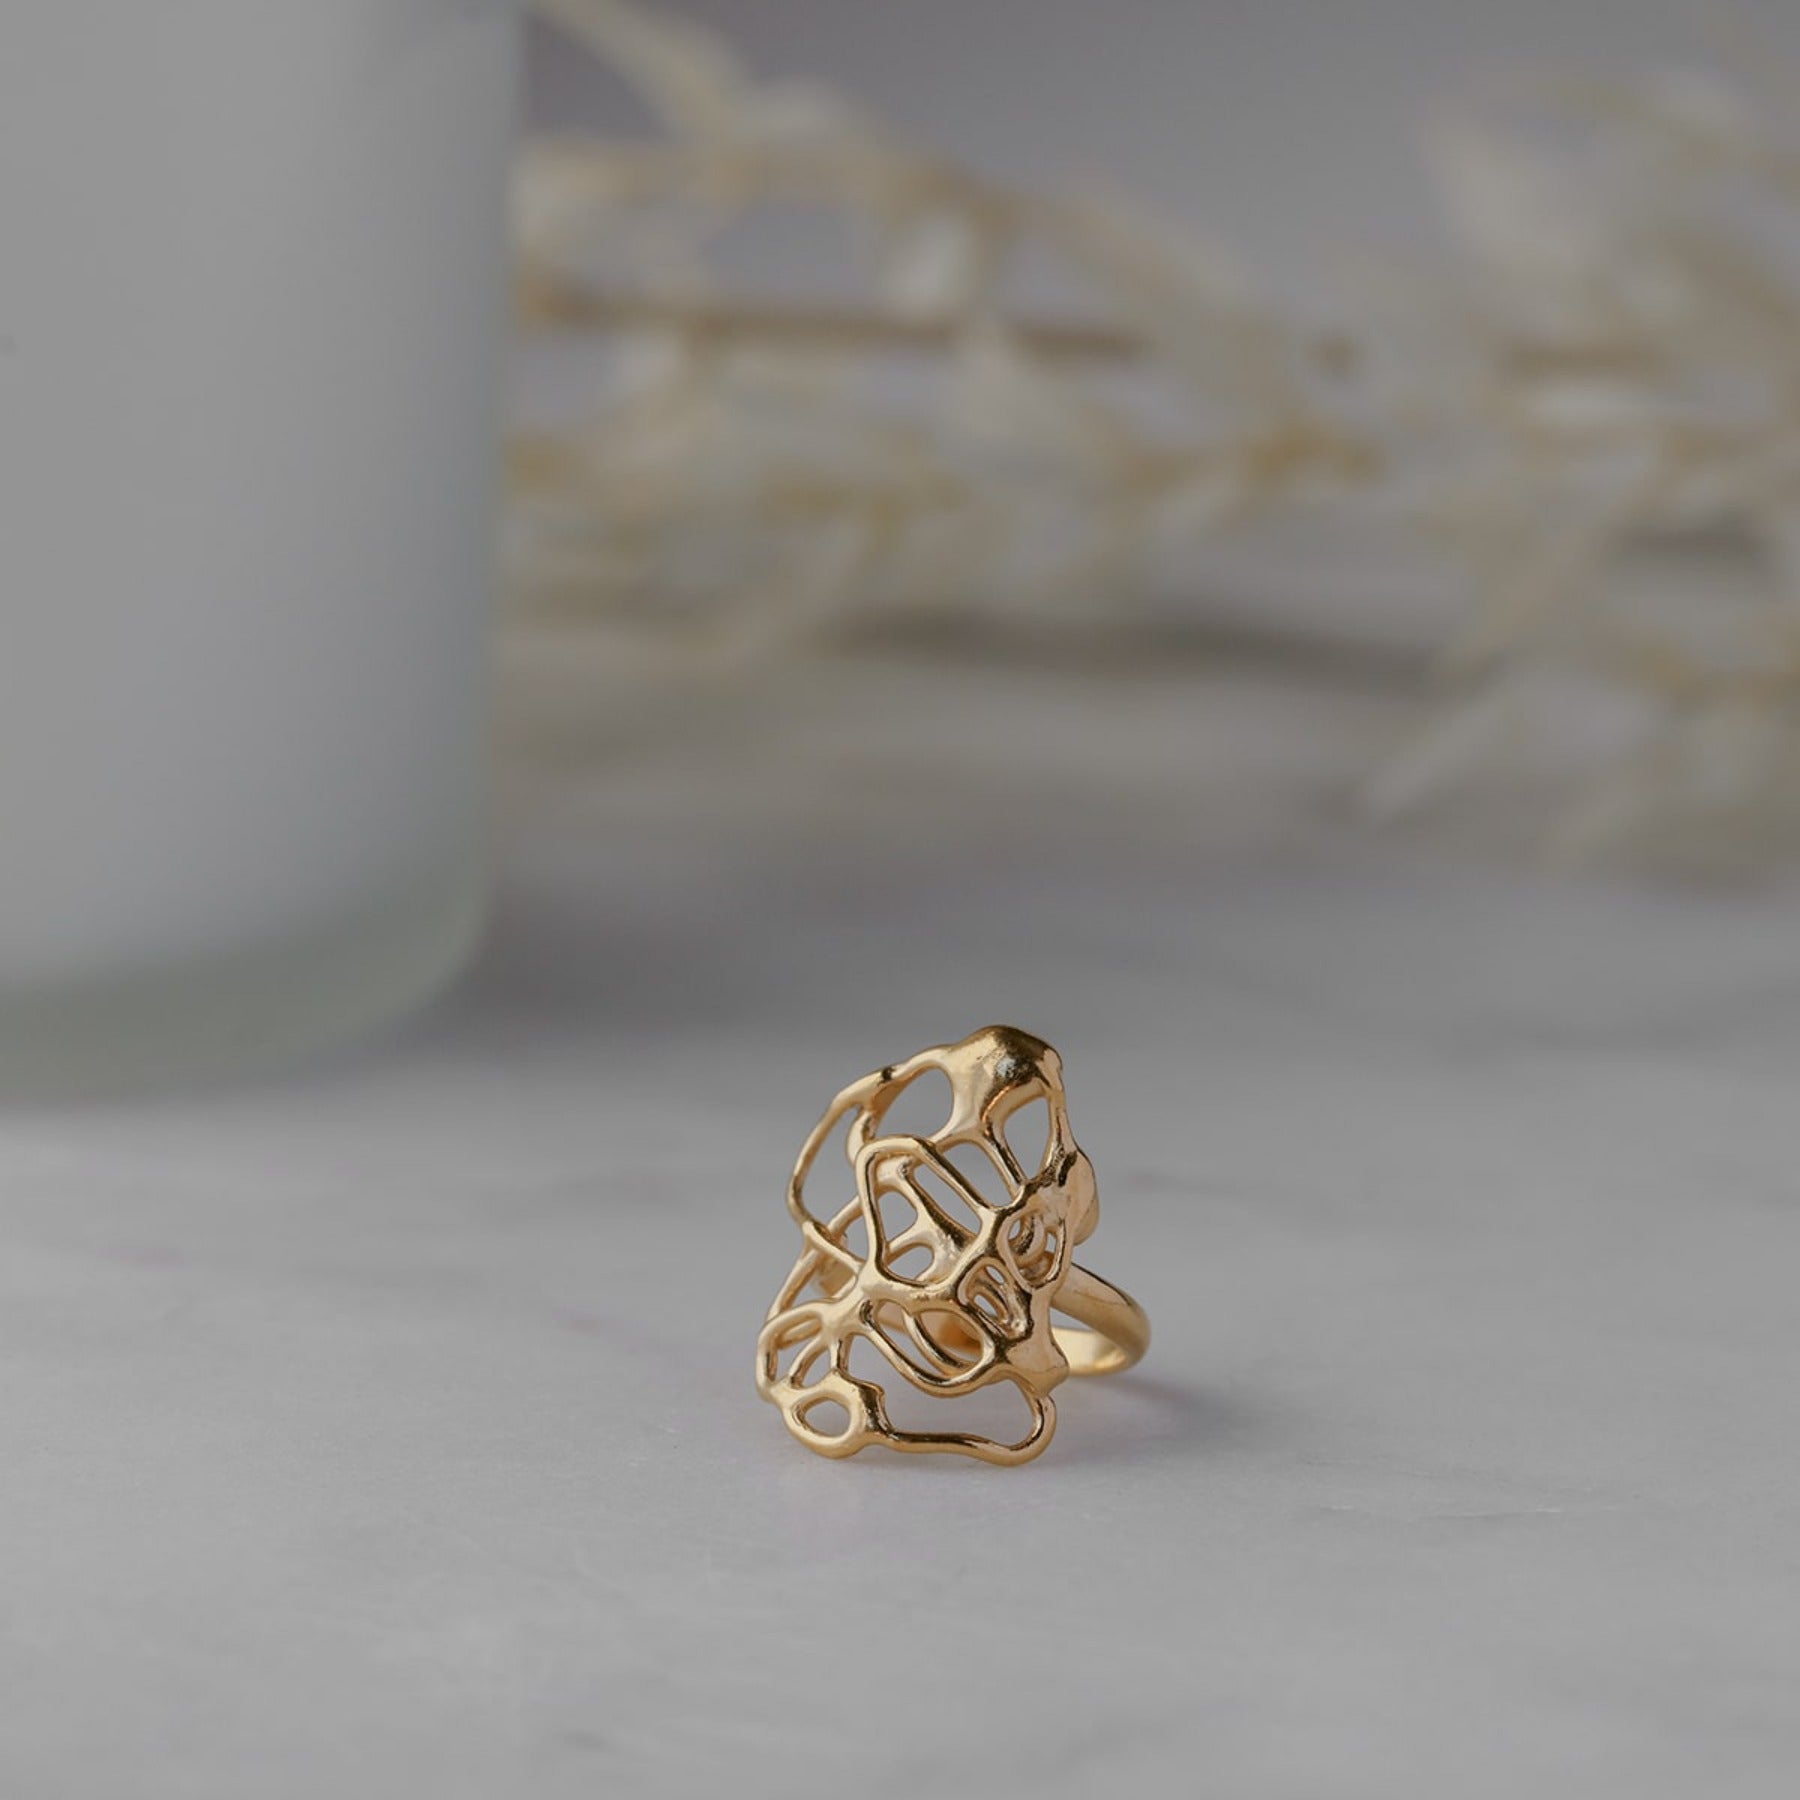 Abstract, squiggle statement cocktail ring in 18k gold vermeil.